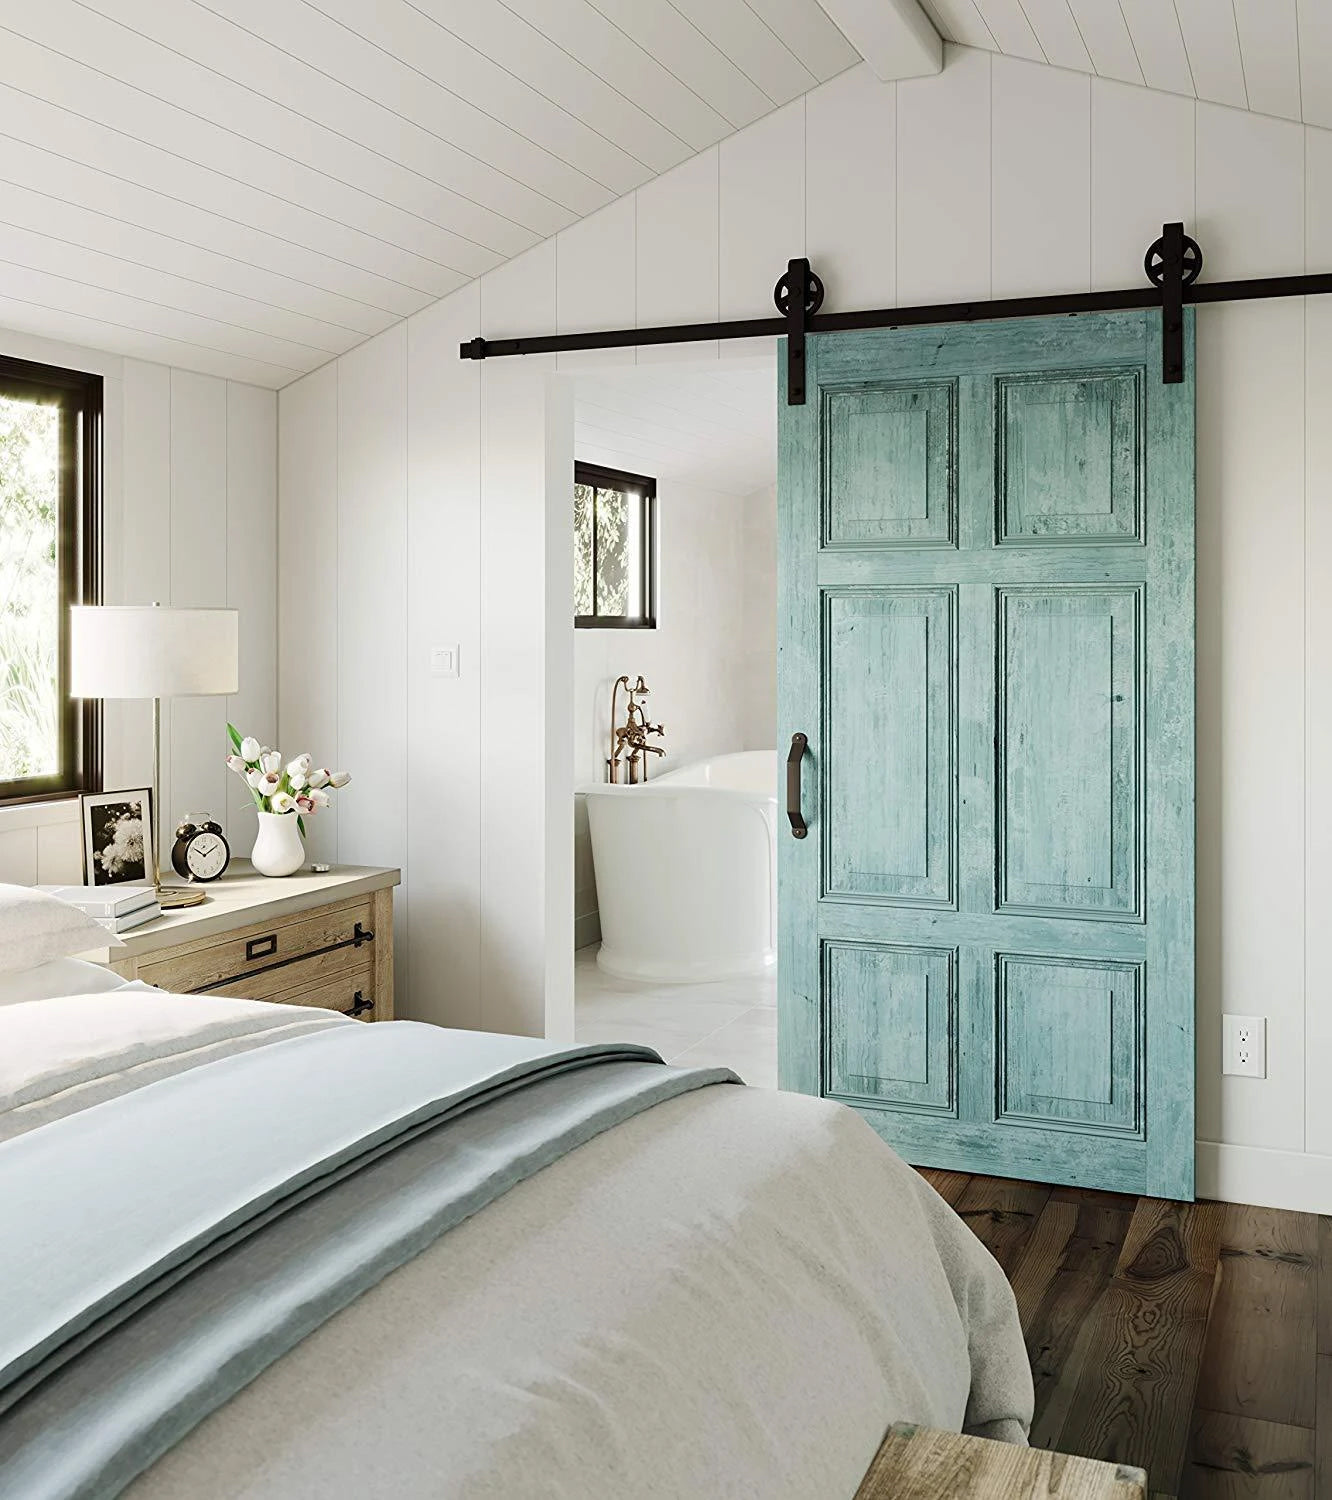 The interior of a bedroom with a white bed, cabinet, sliding barn door, and bathtub in view.